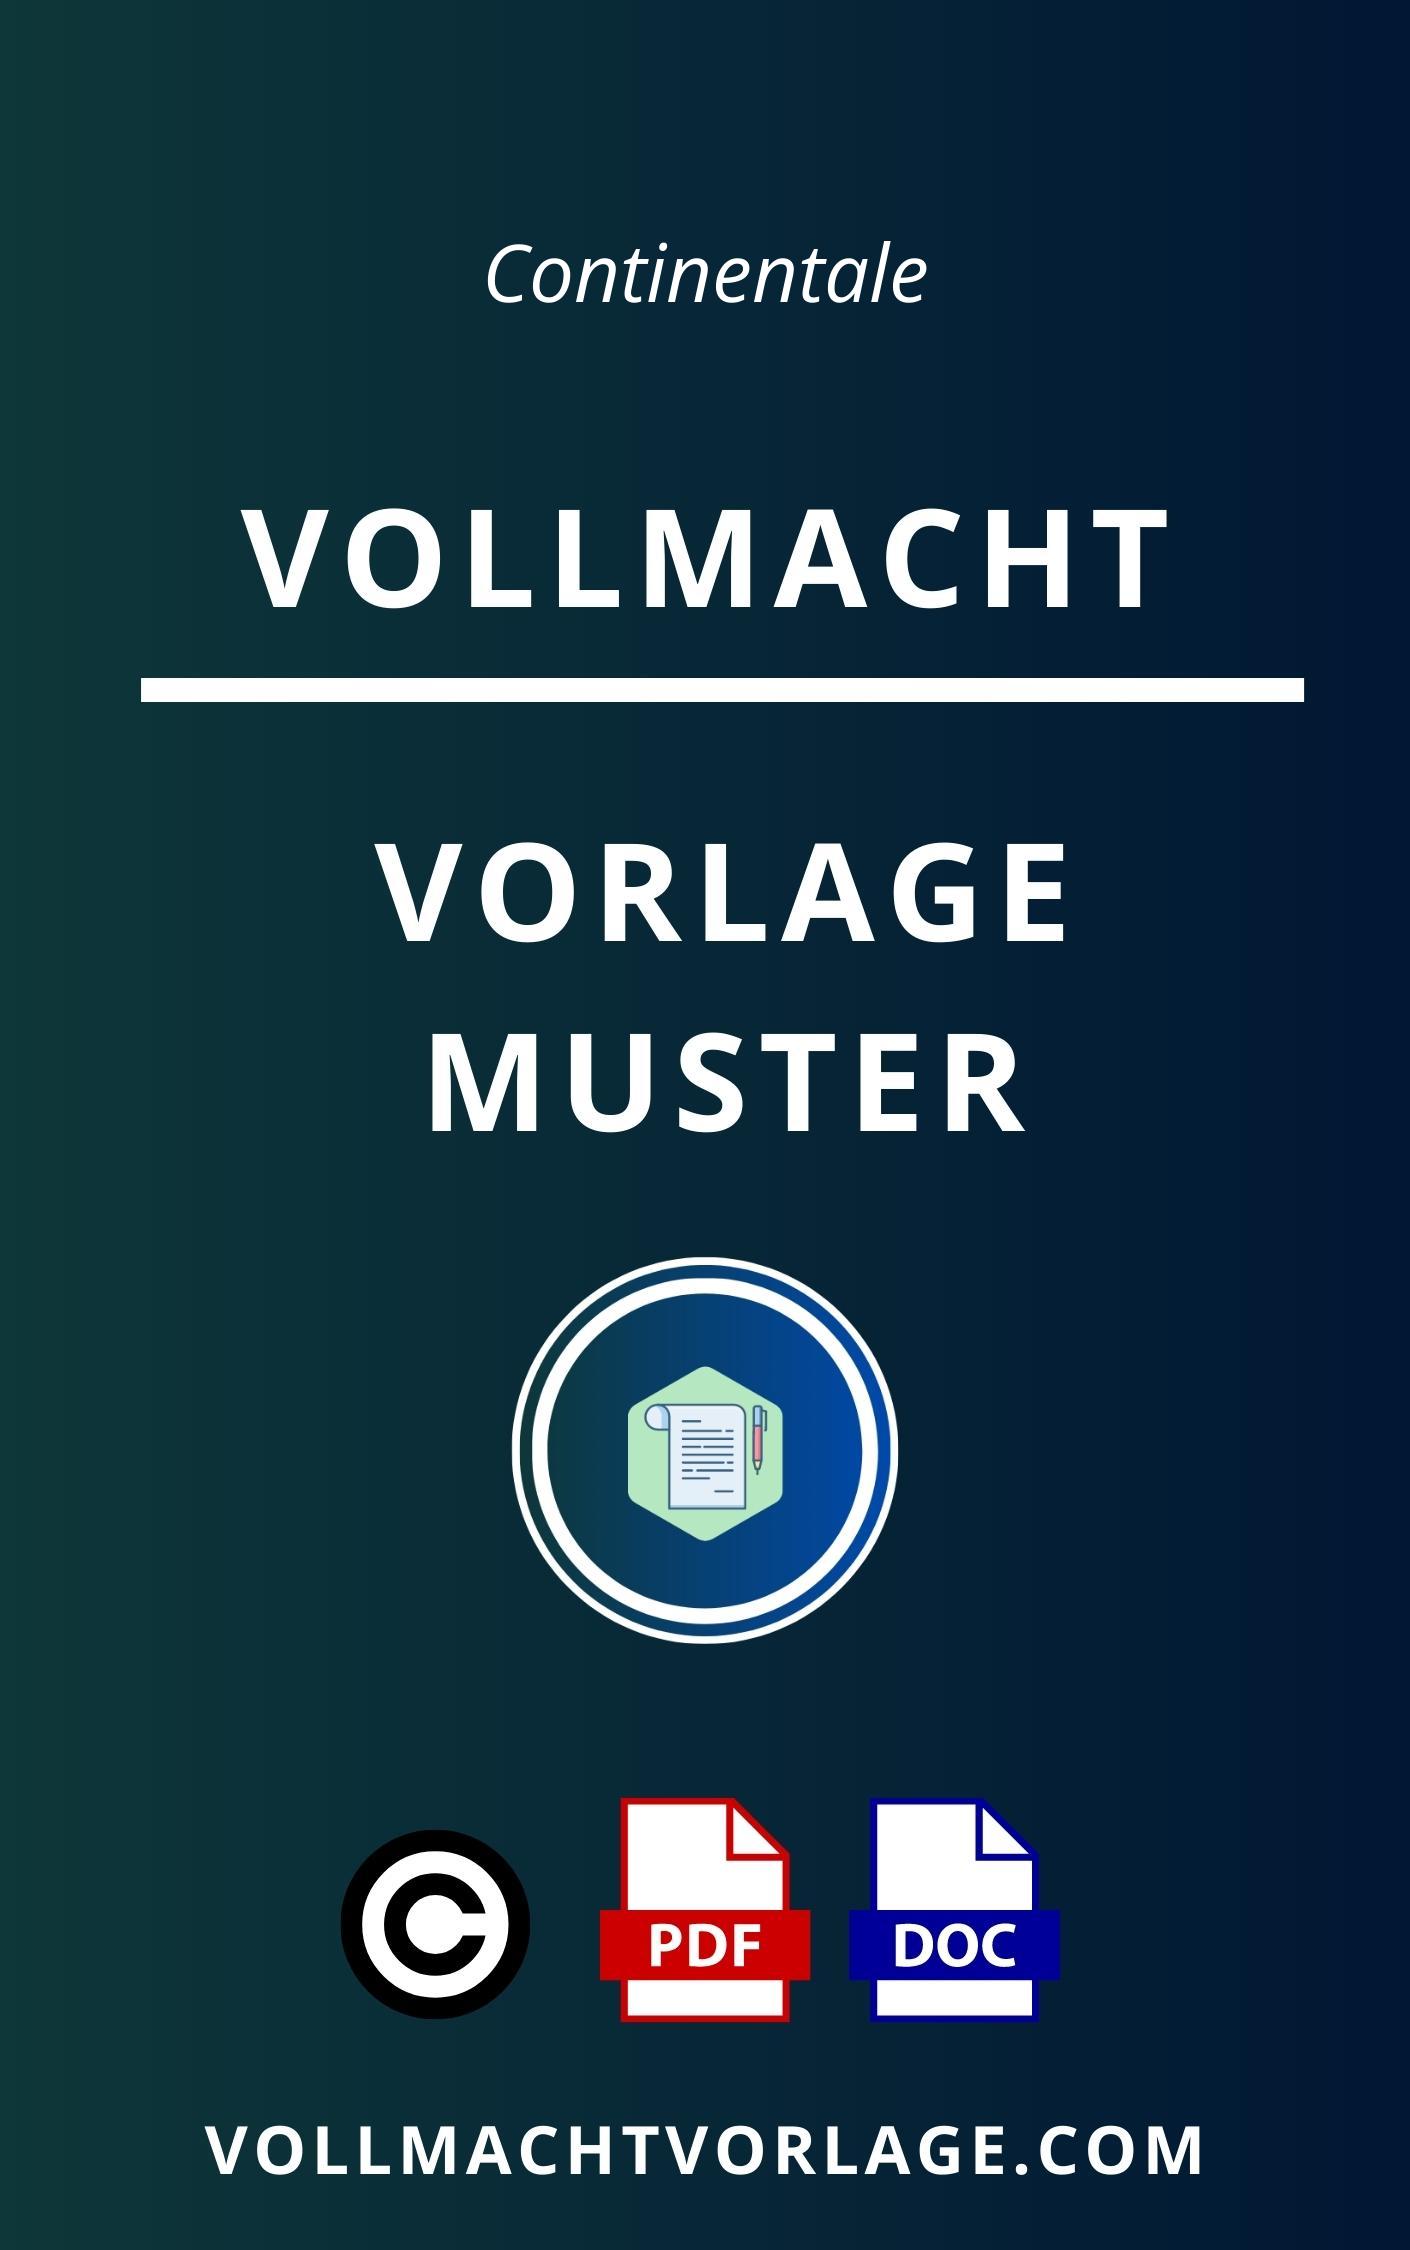 Continentale Vollmacht Muster